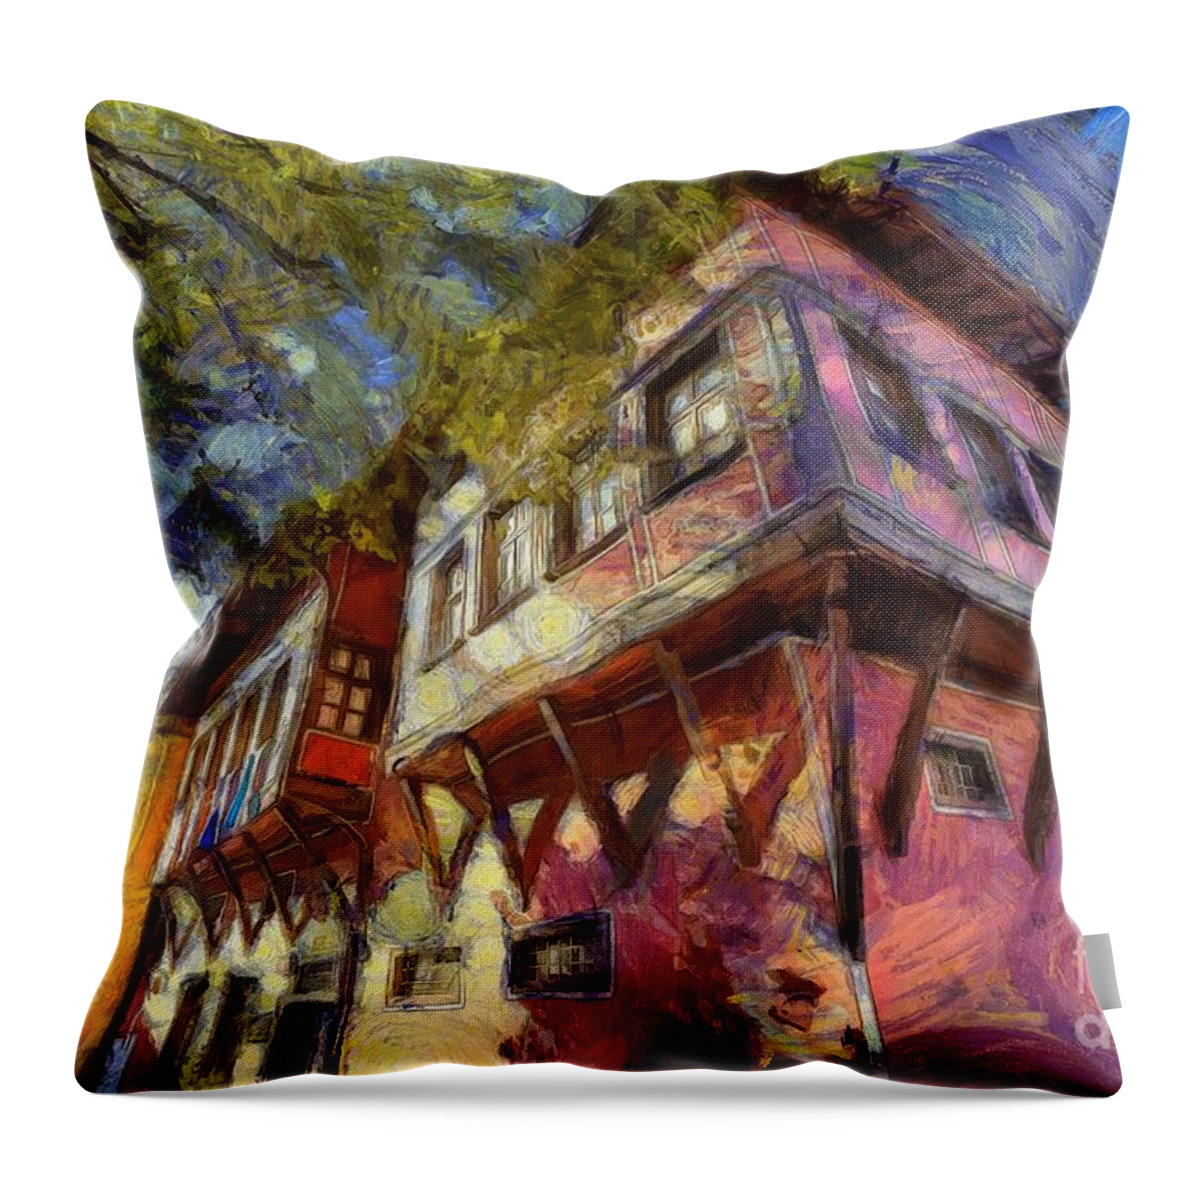 Plovdiv Throw Pillow featuring the mixed media Old Plovdiv Architecture by Eva Lechner